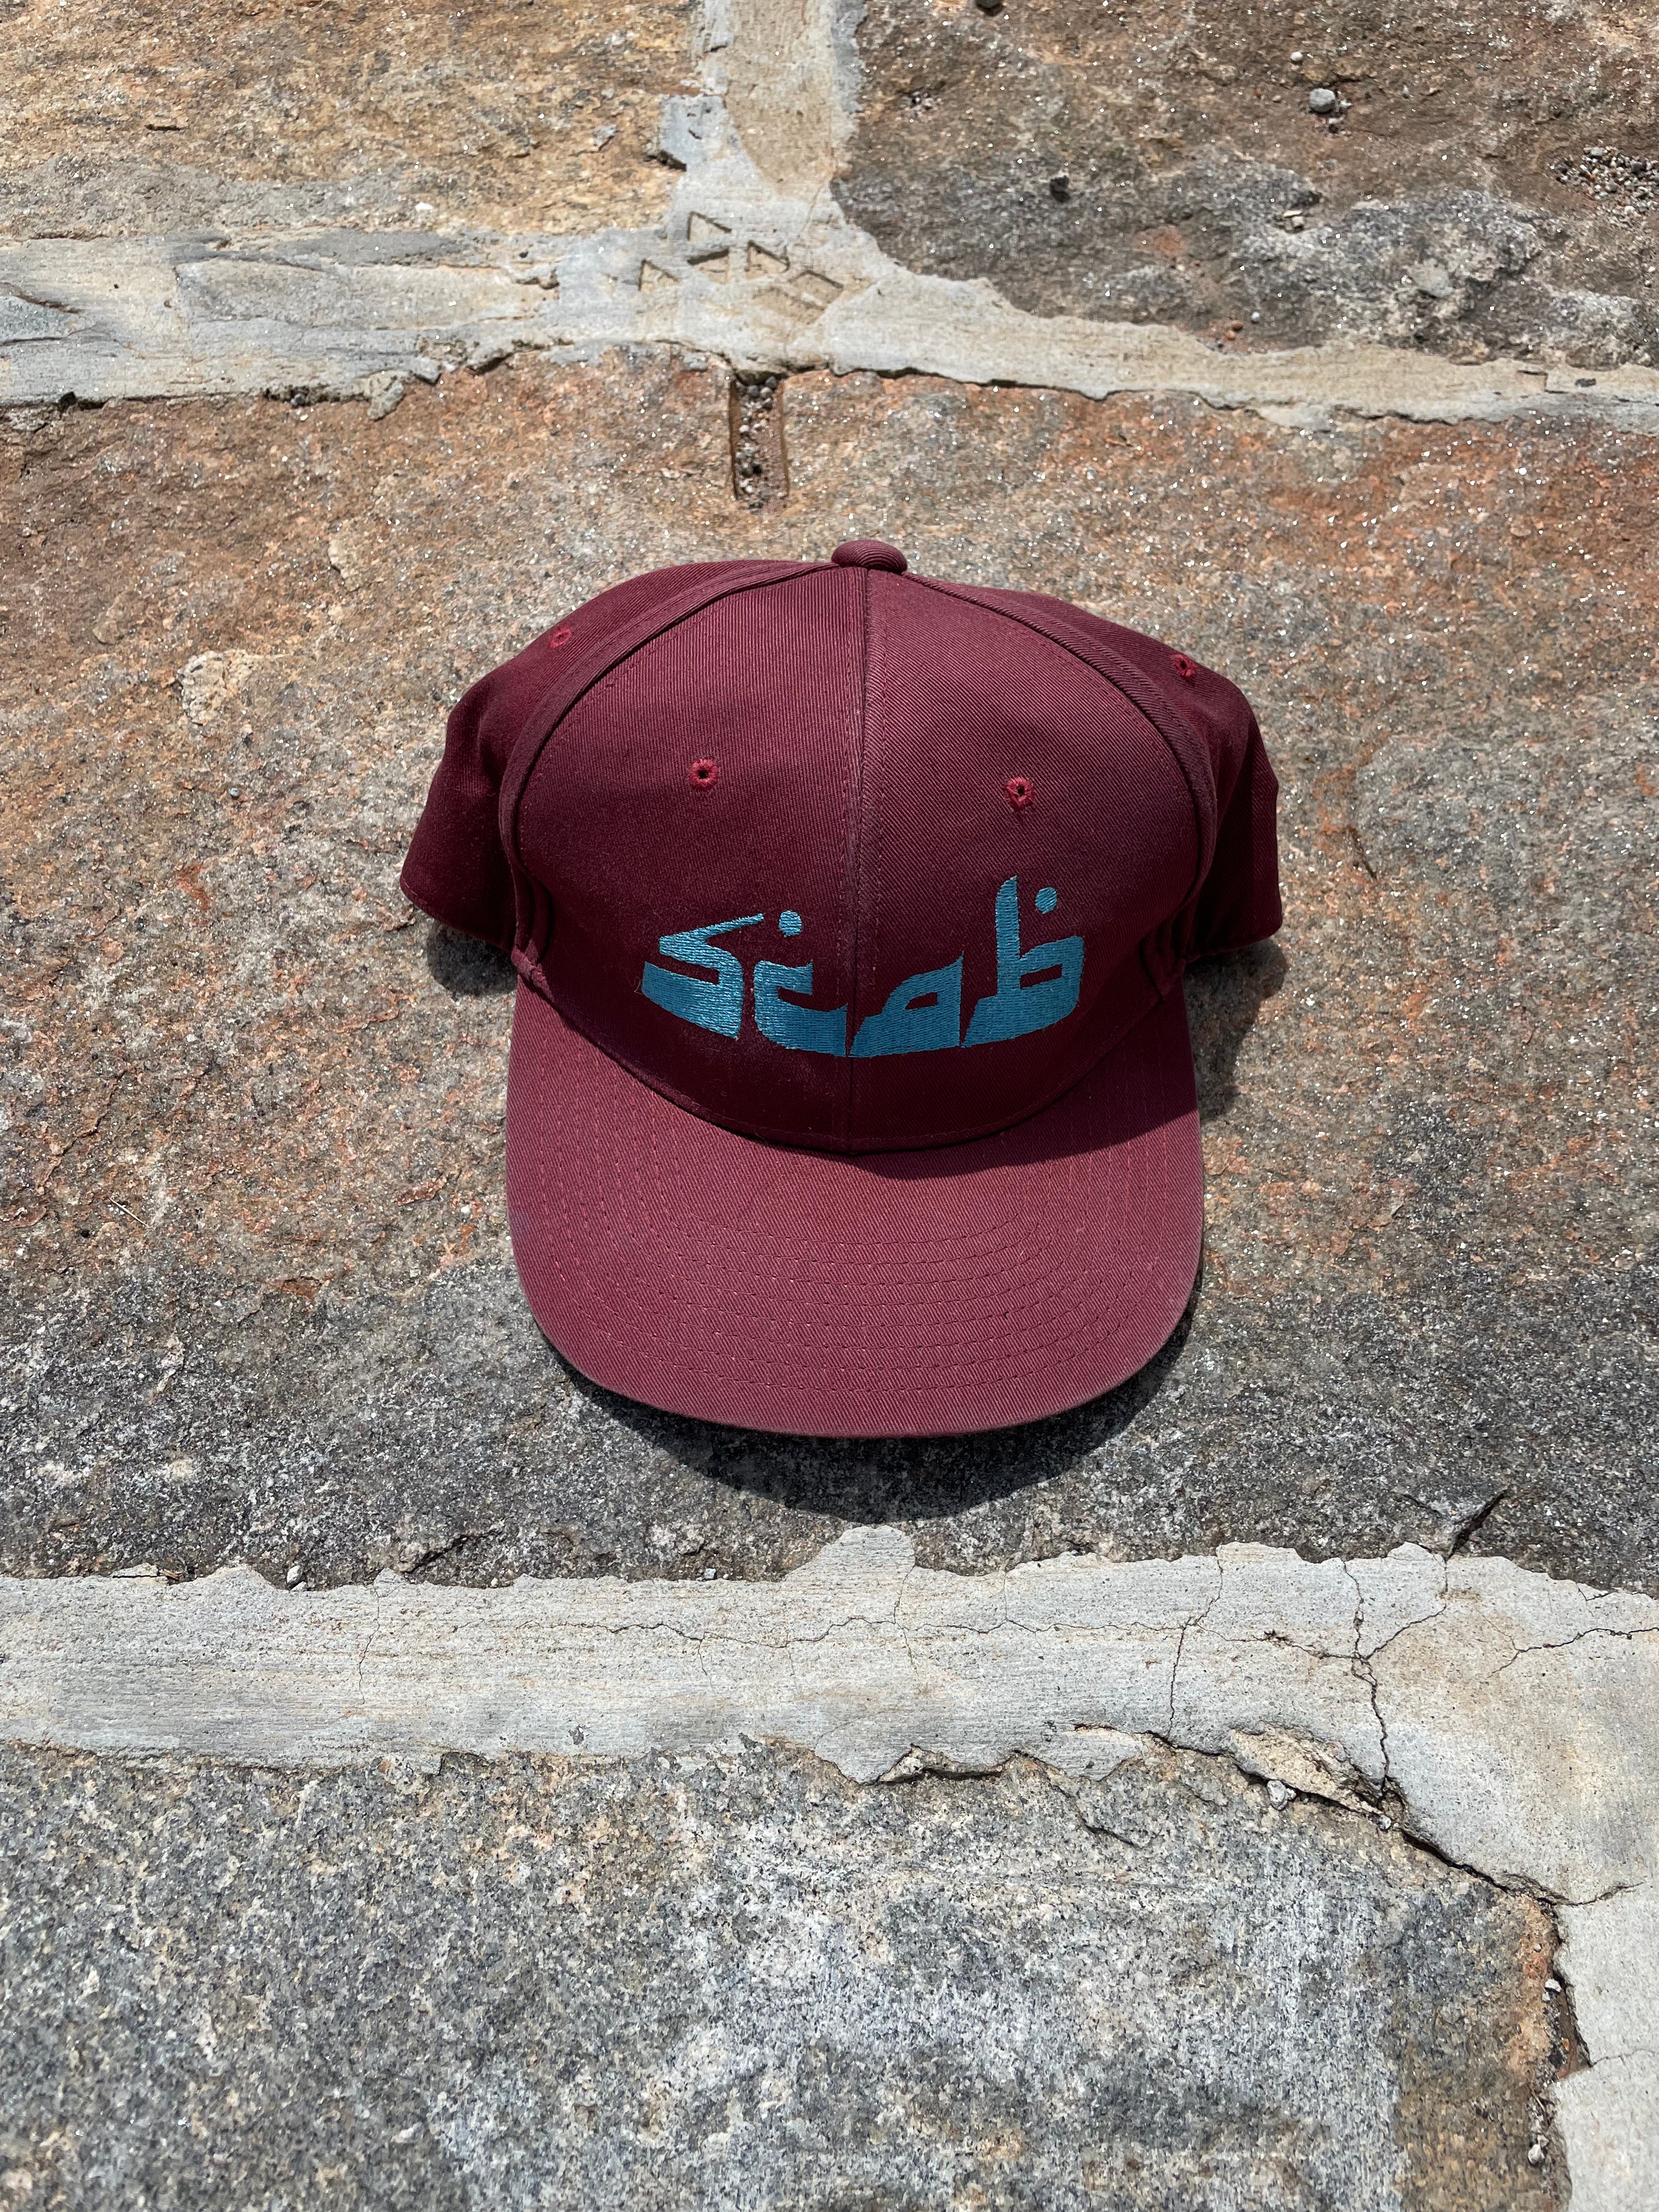 SS16 “The Greatest” - Undercover 'SCAB' Snapback – rwndbckwrds